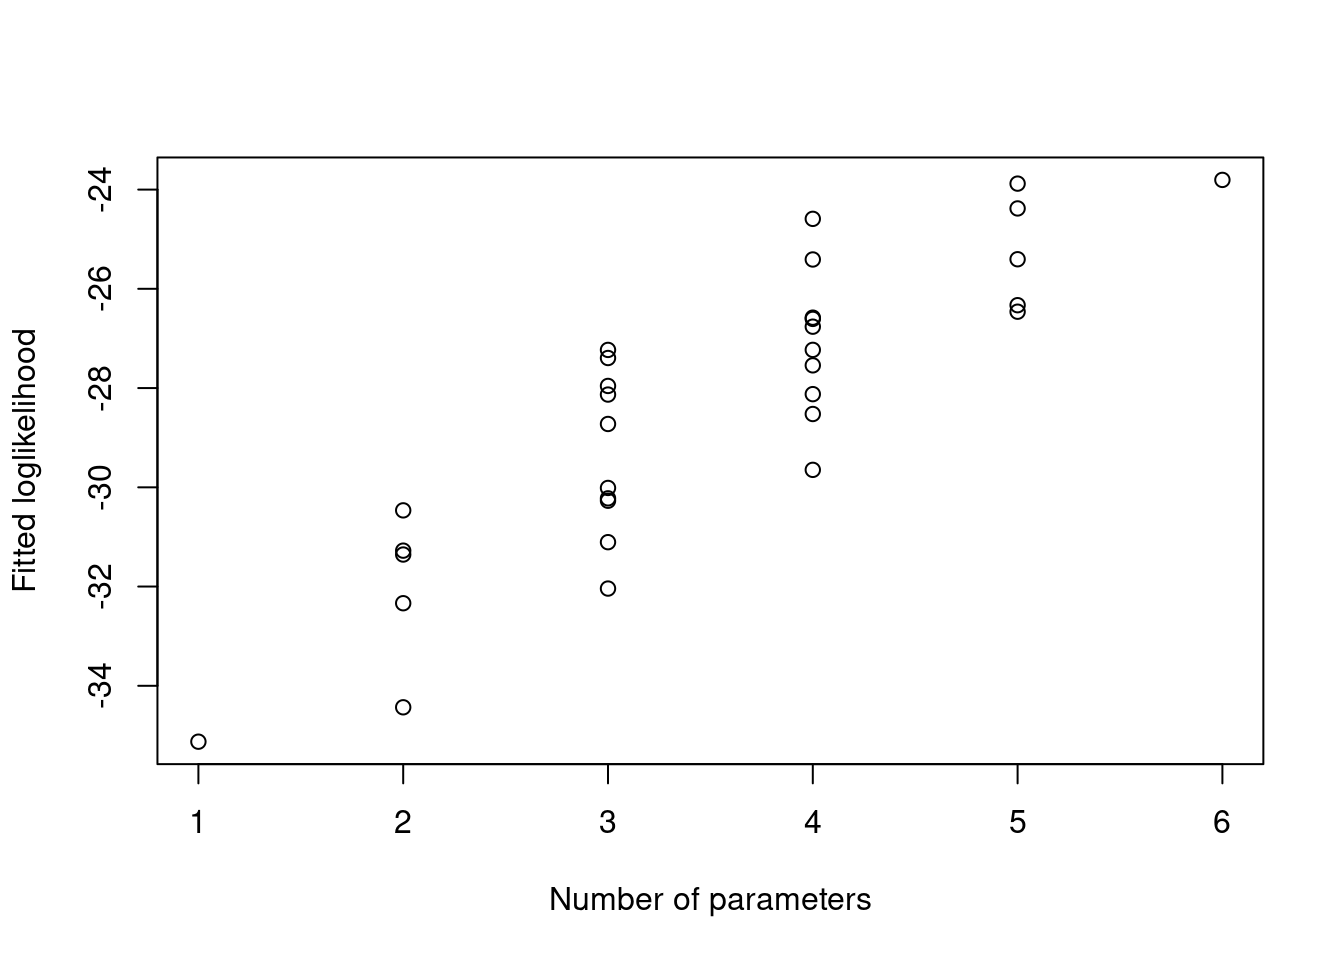 Fitted loglikelihood for 32 possible logistic regression models for the \texttt{nodal} data